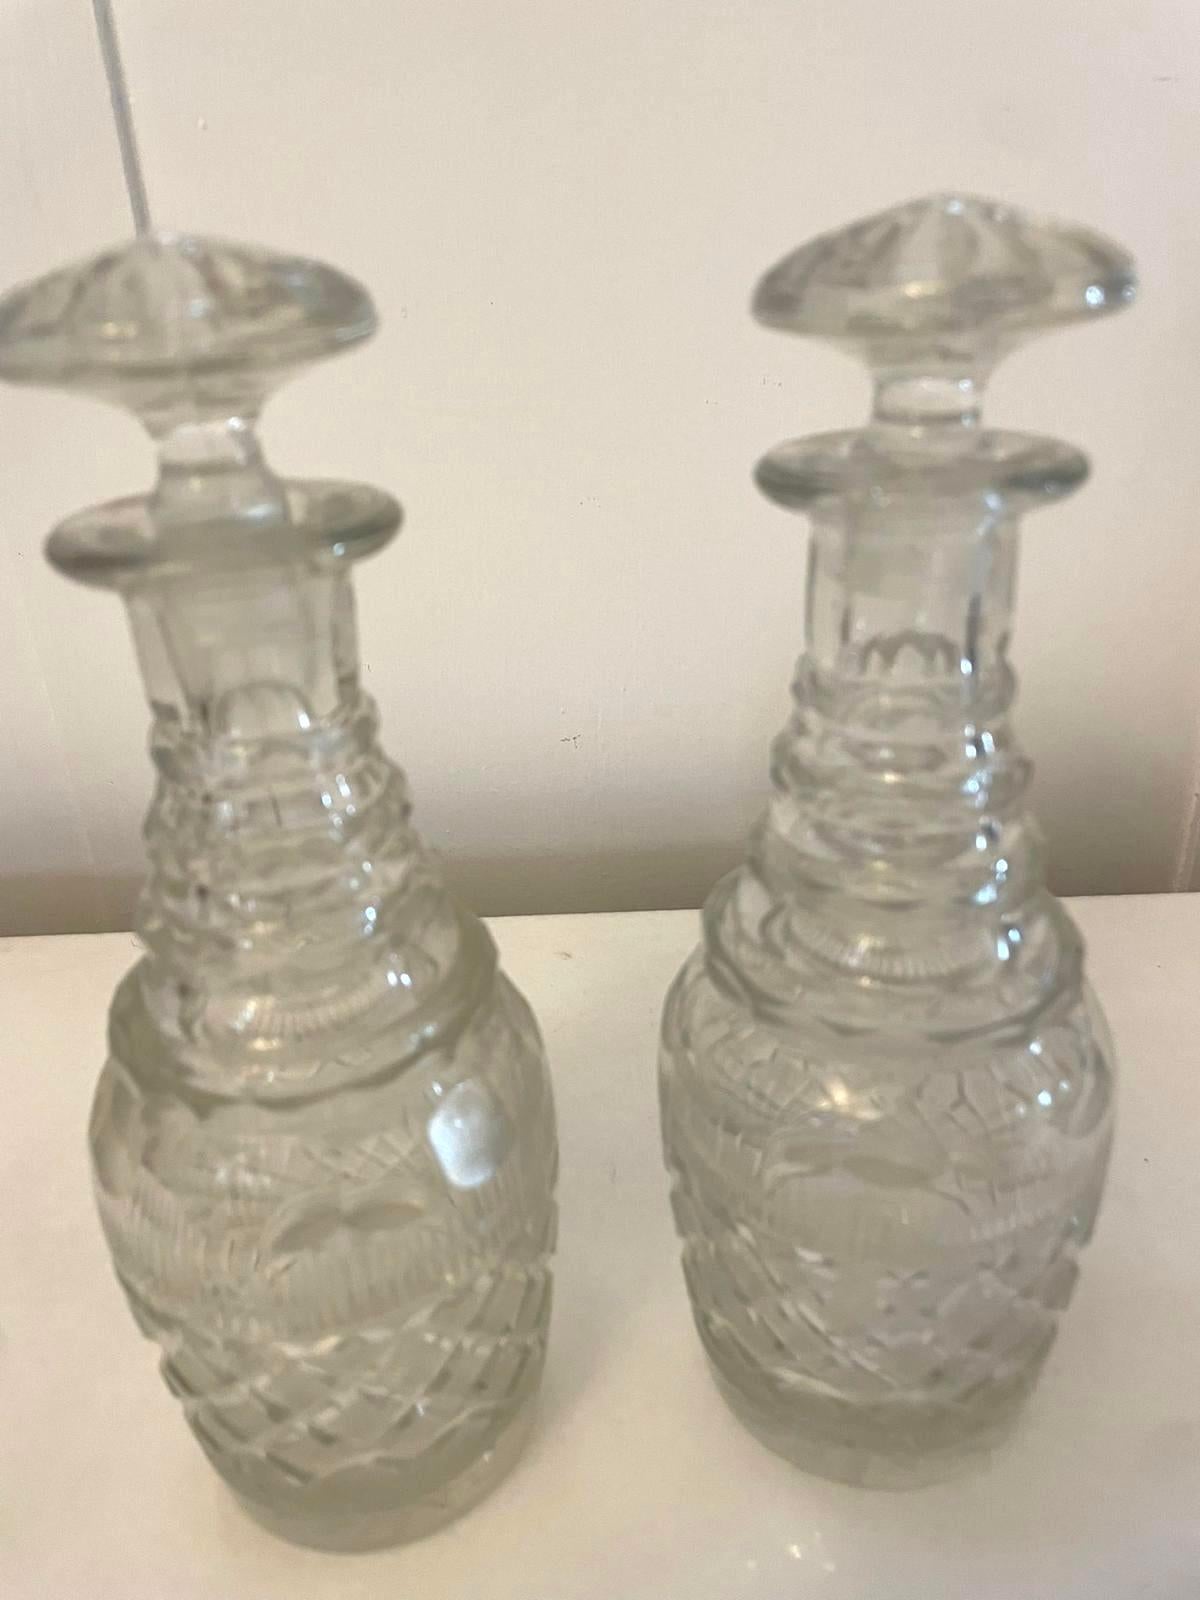 Small pair of antique George III quality cut glass decanters with original stoppers 

A quaint pair in perfect original condition and of desirable proportions

Dimensions:
Height 19.5 cm (7.67 in)
Width 7 cm (2.75 in)
Depth 7 cm (2.75